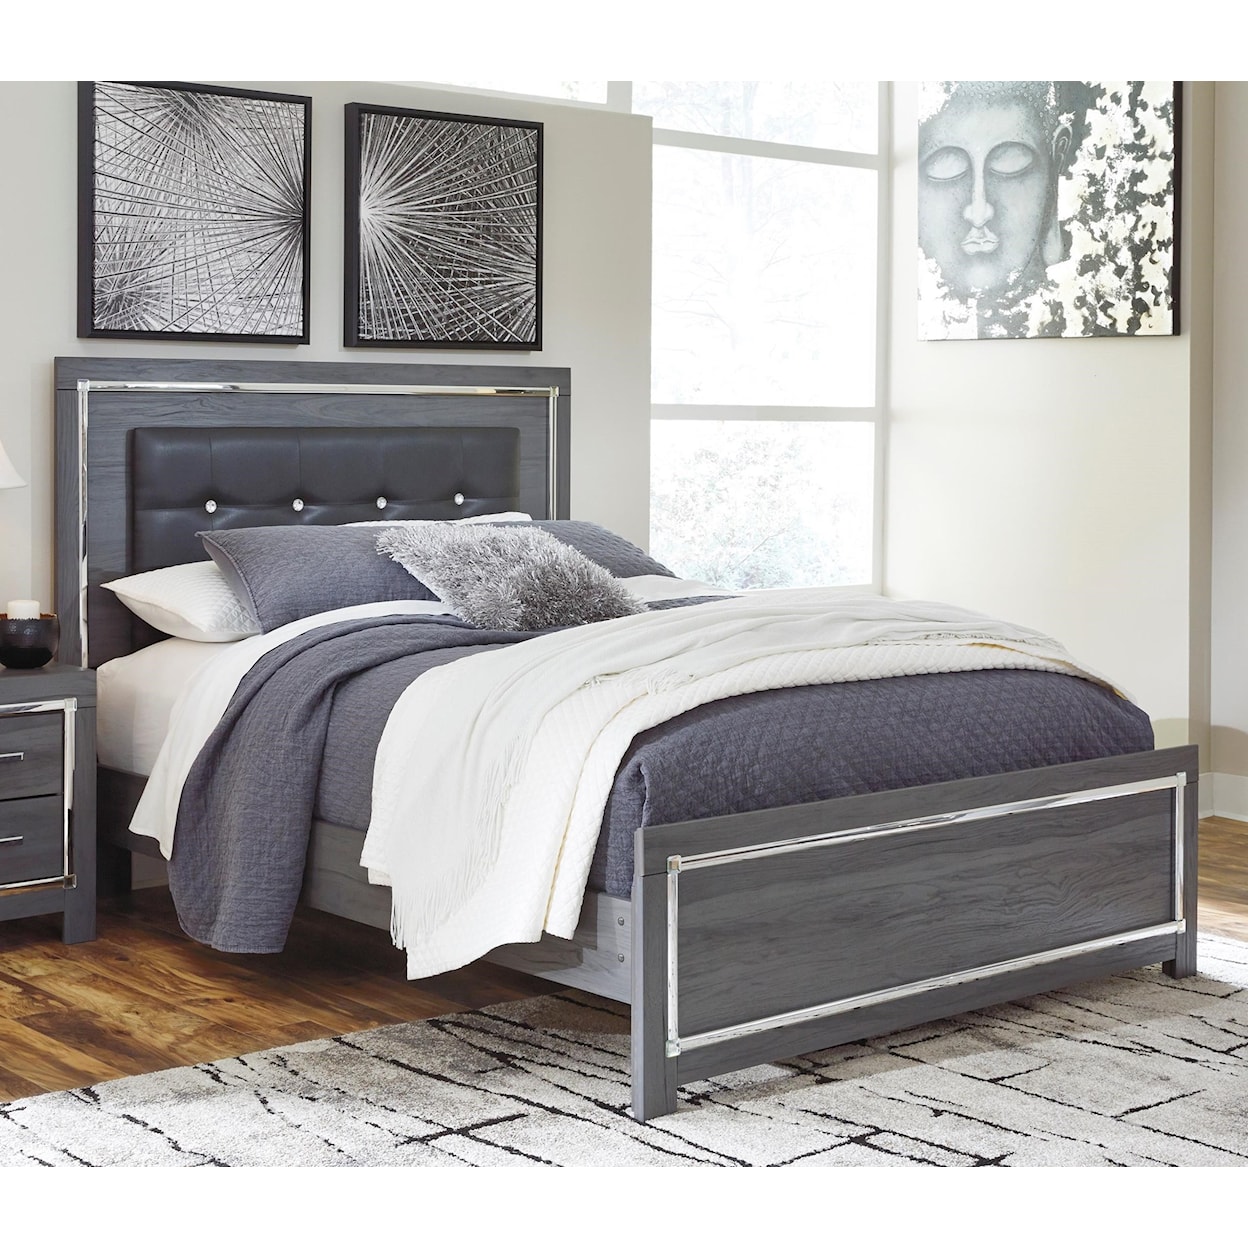 Signature Design by Ashley Lodanna Full Upholstered Bed